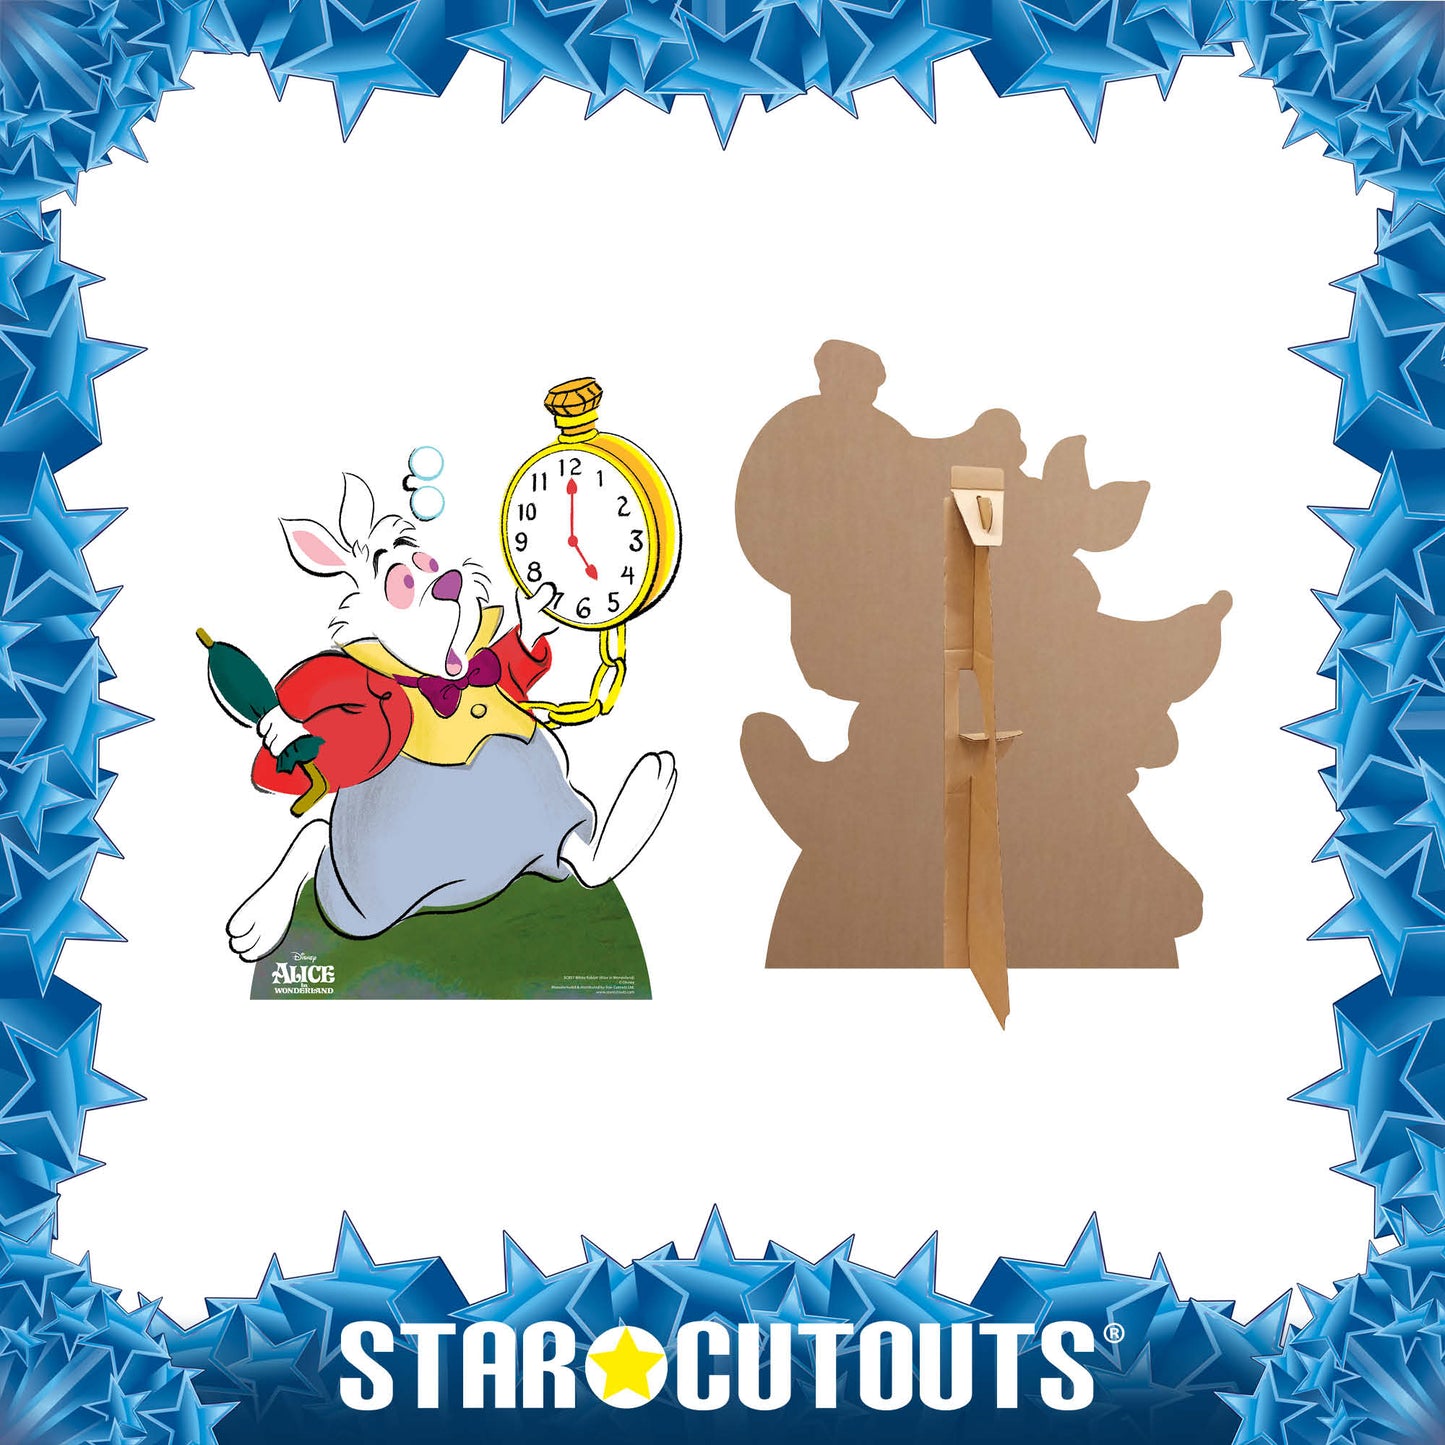 SC857 White Rabbit Classic Alice in Wonderland Cardboard Cut Out Height 77cm - Star Cutouts